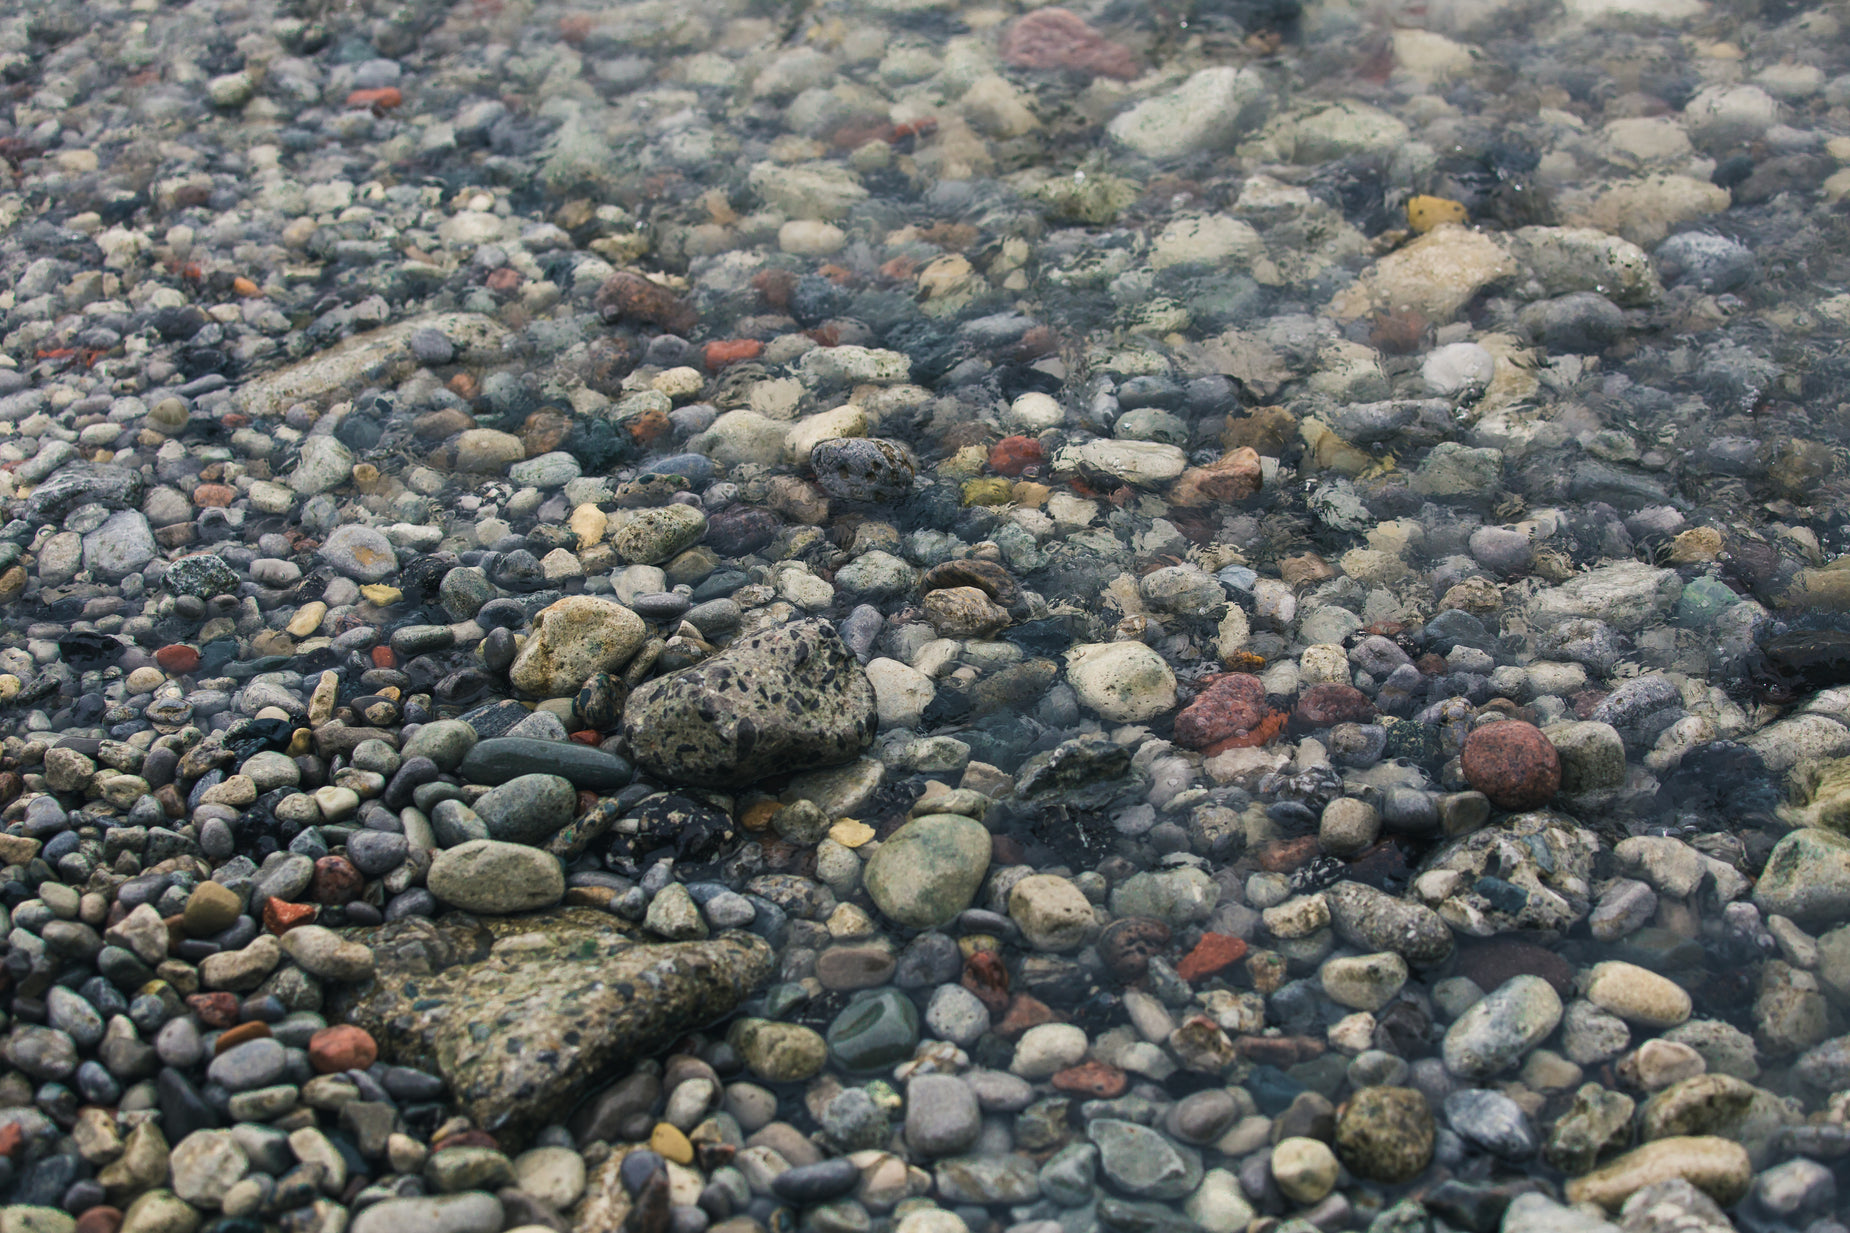 the rocks and pebbles are all that have been thrown in the water